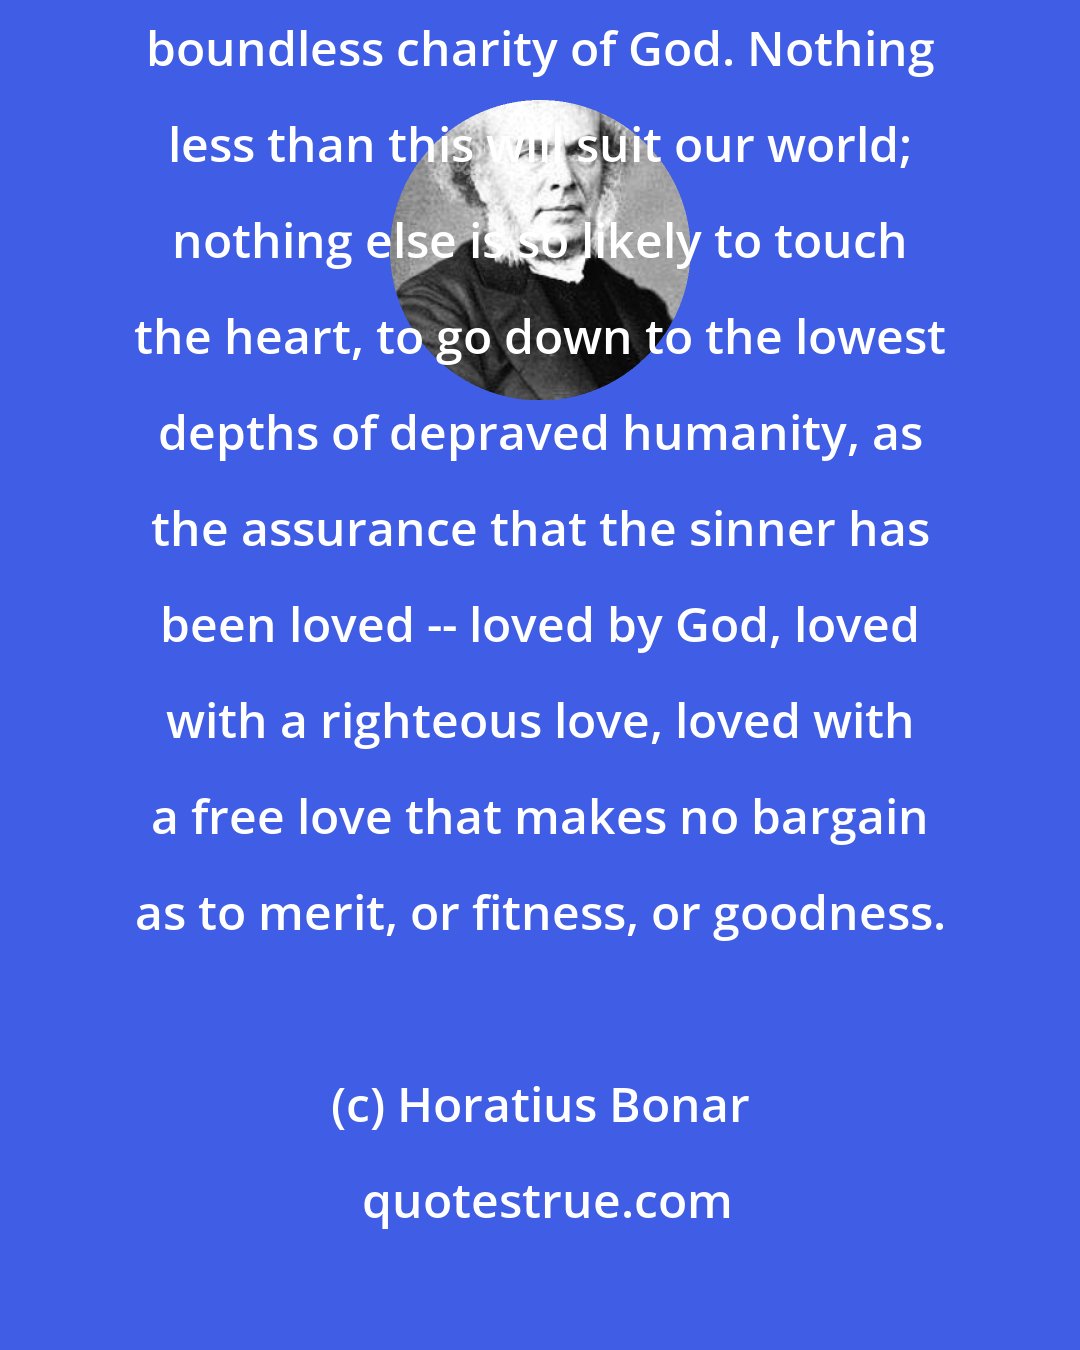 Horatius Bonar: The gospel is the proclamation of free love; the revelation of the boundless charity of God. Nothing less than this will suit our world; nothing else is so likely to touch the heart, to go down to the lowest depths of depraved humanity, as the assurance that the sinner has been loved -- loved by God, loved with a righteous love, loved with a free love that makes no bargain as to merit, or fitness, or goodness.